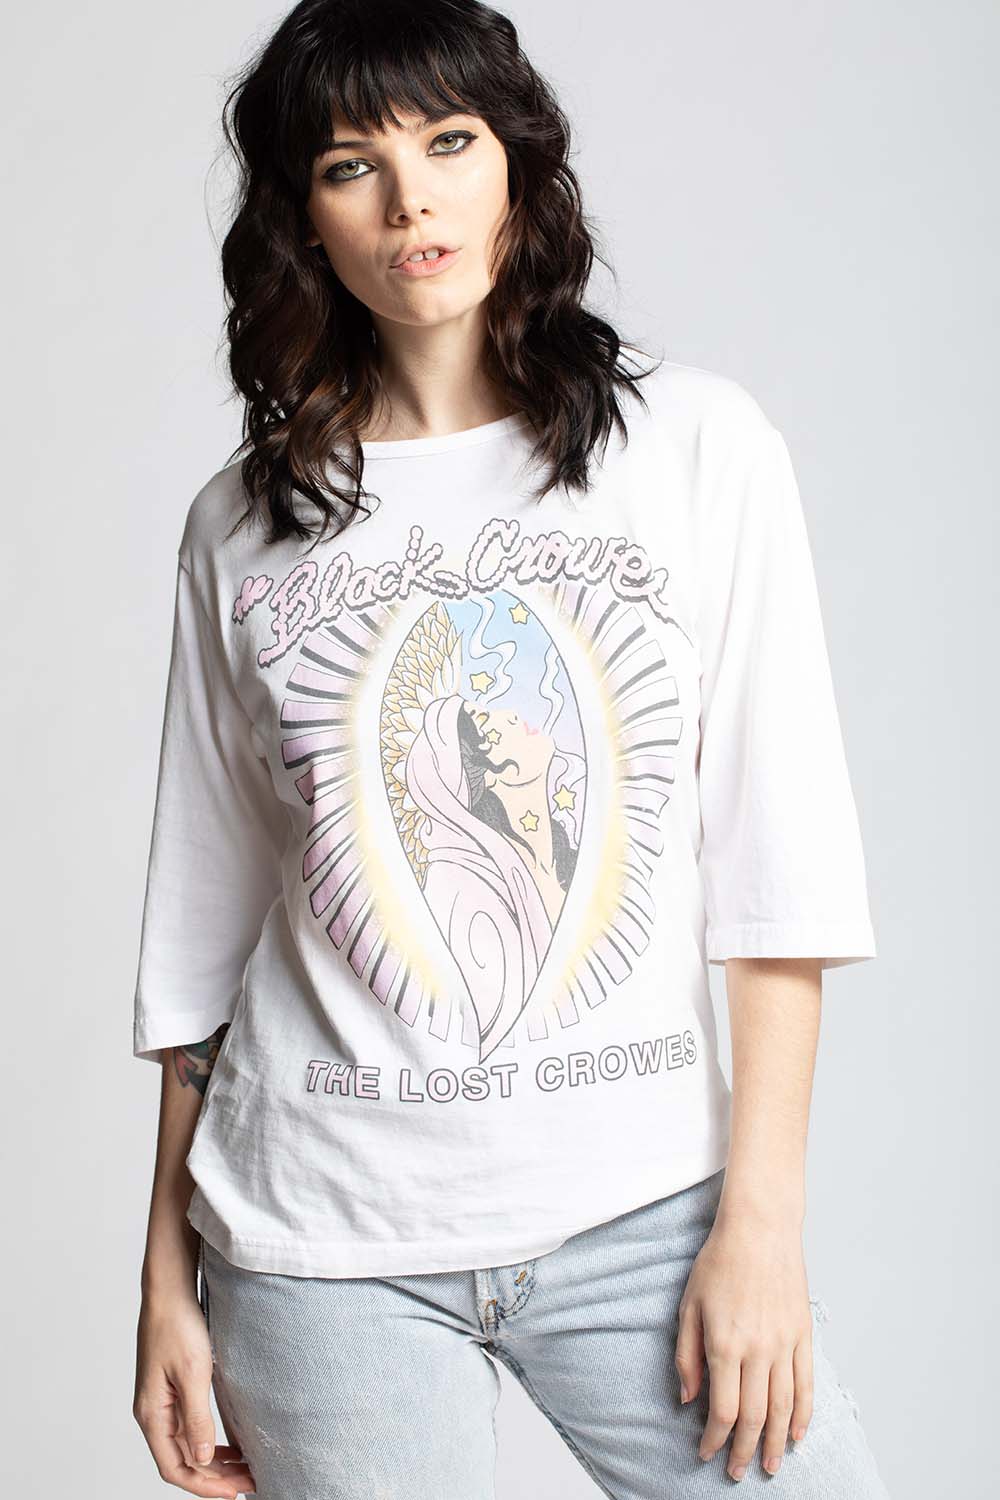 The Black Crowes The Lost Crowes Tee